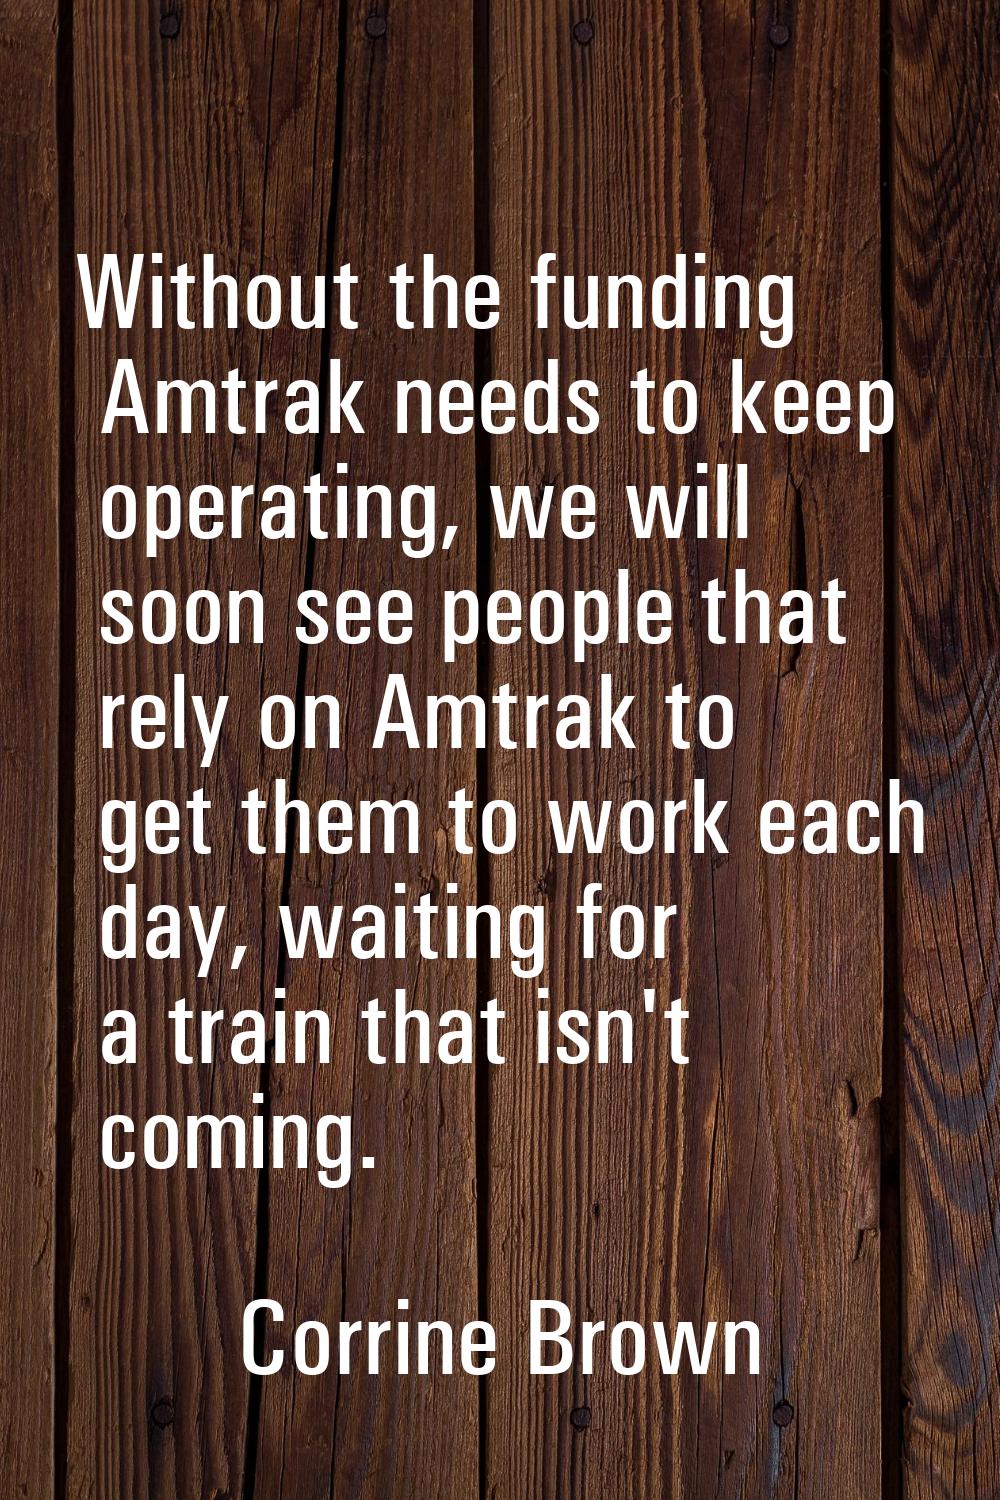 Without the funding Amtrak needs to keep operating, we will soon see people that rely on Amtrak to 